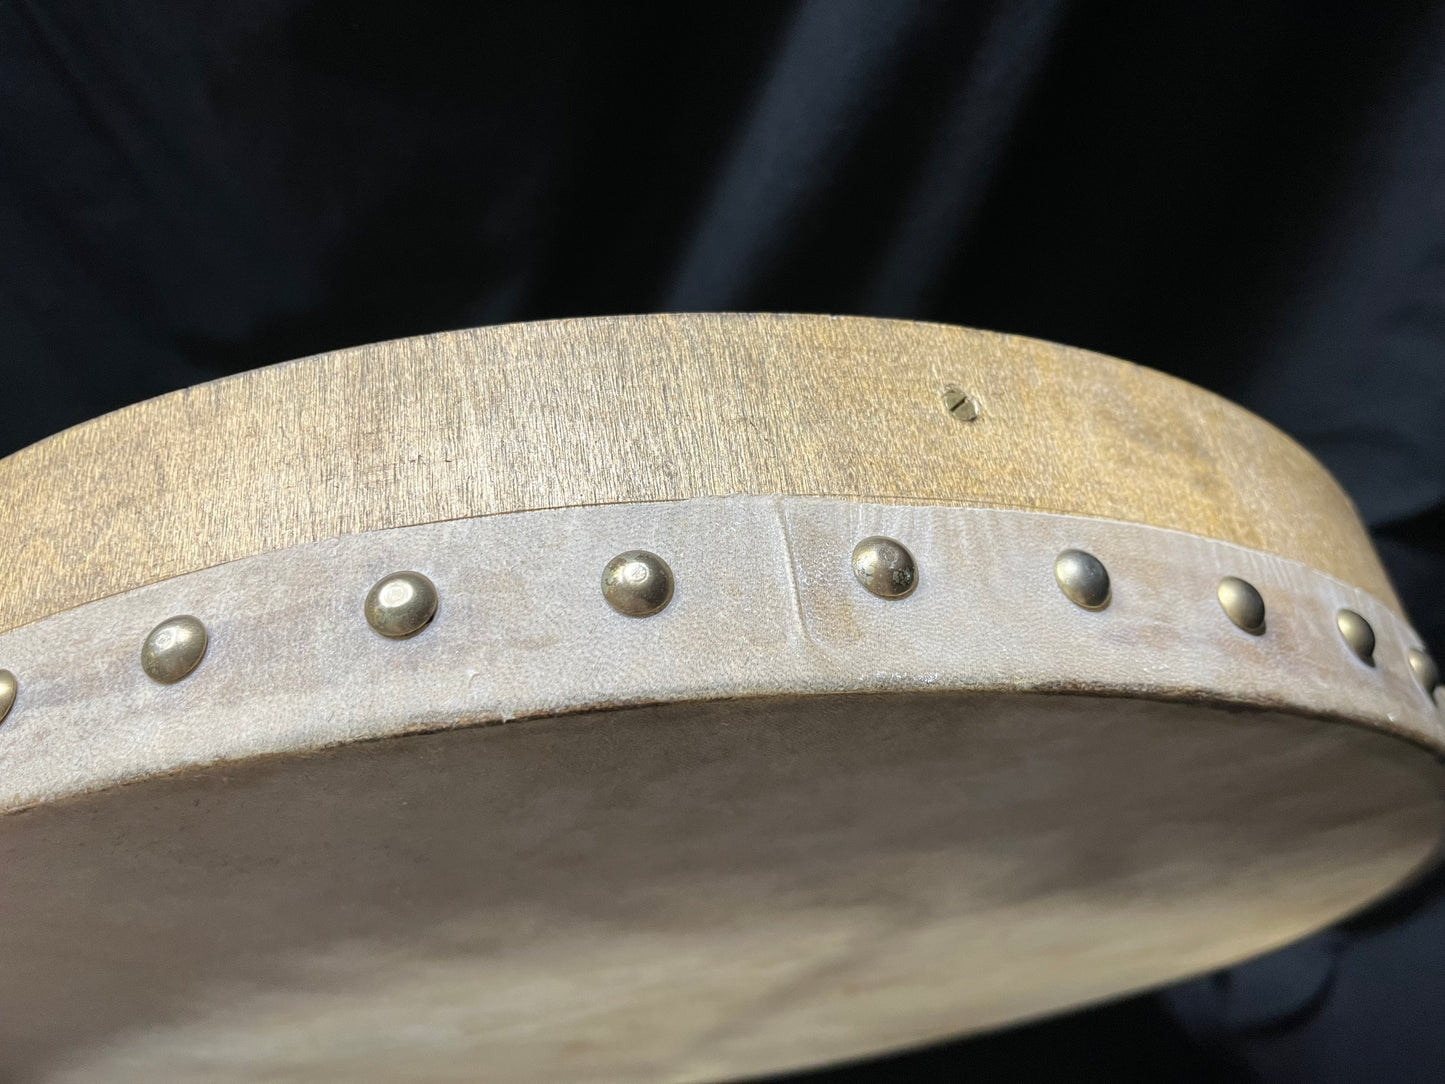 Hand Made Bodhran / Irish Drum Traditional Instrument with Beater